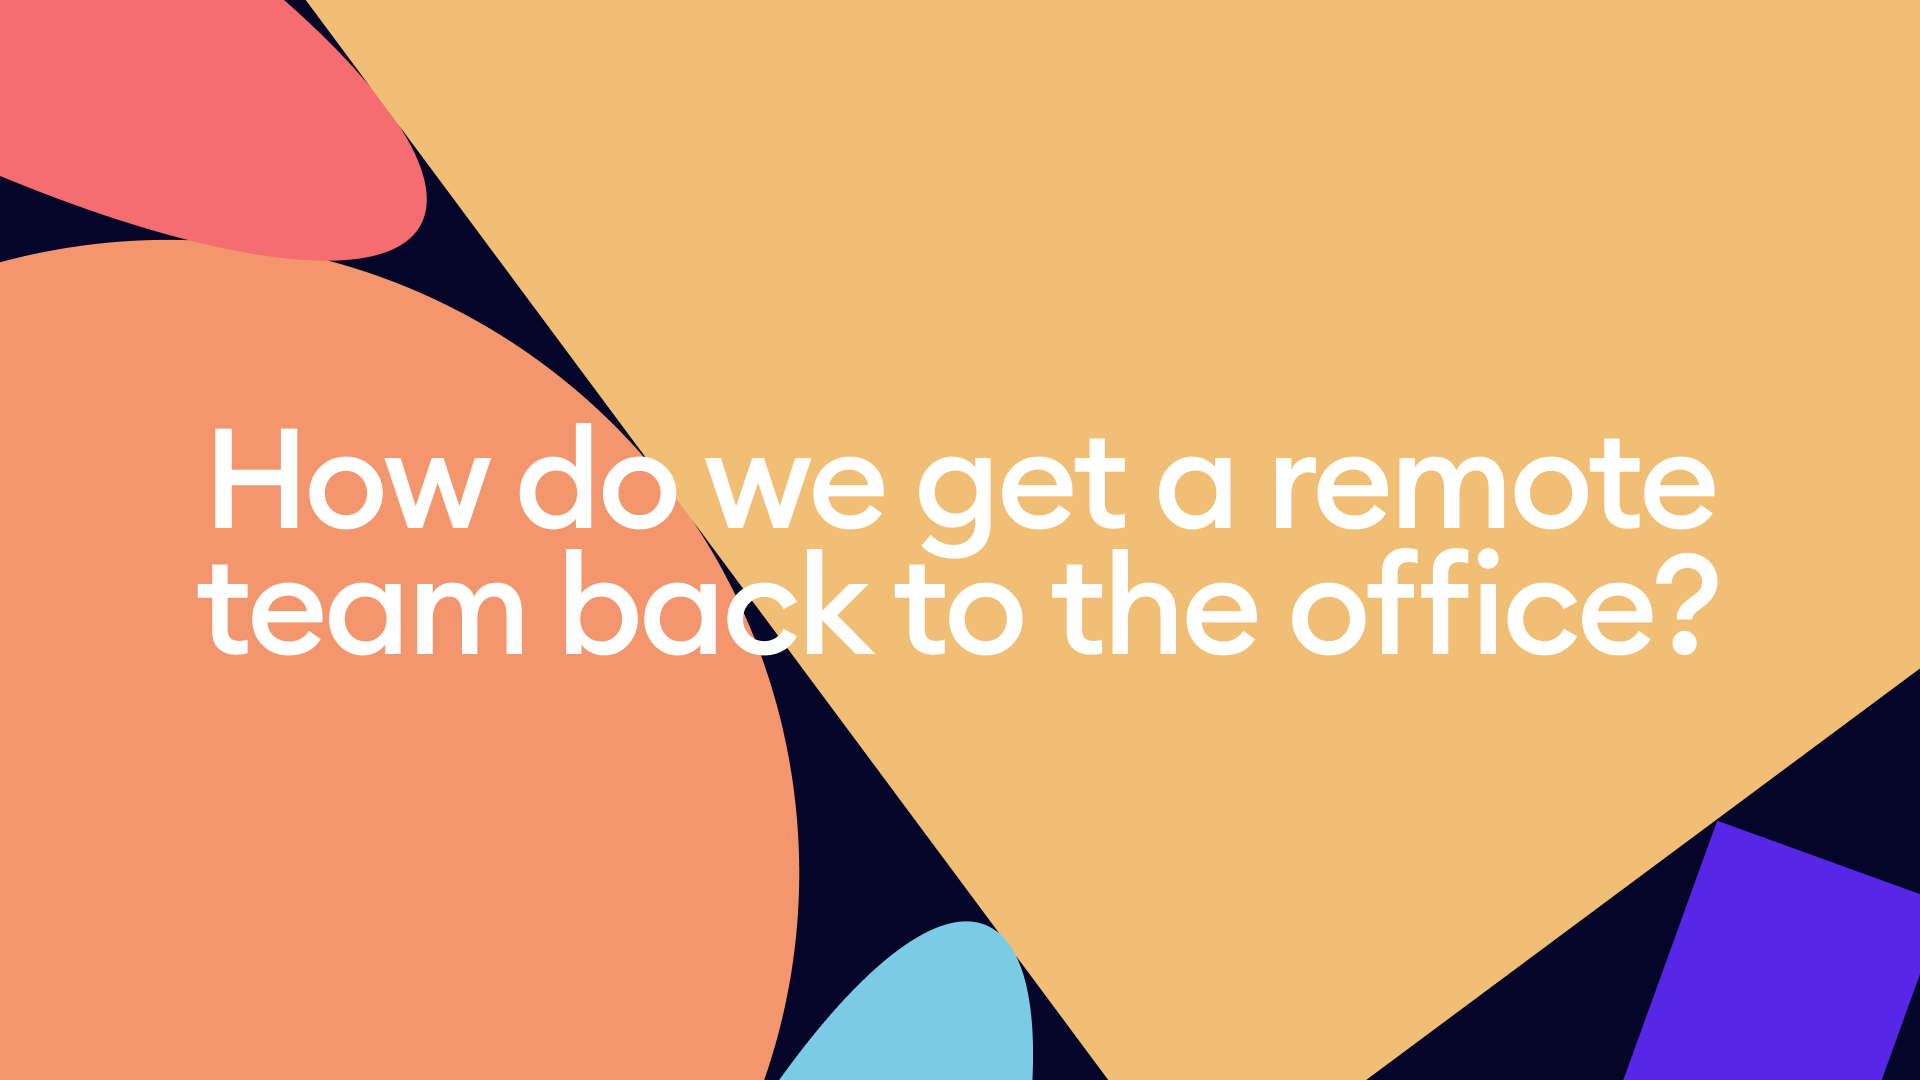 How do we get a remote team back to the office?